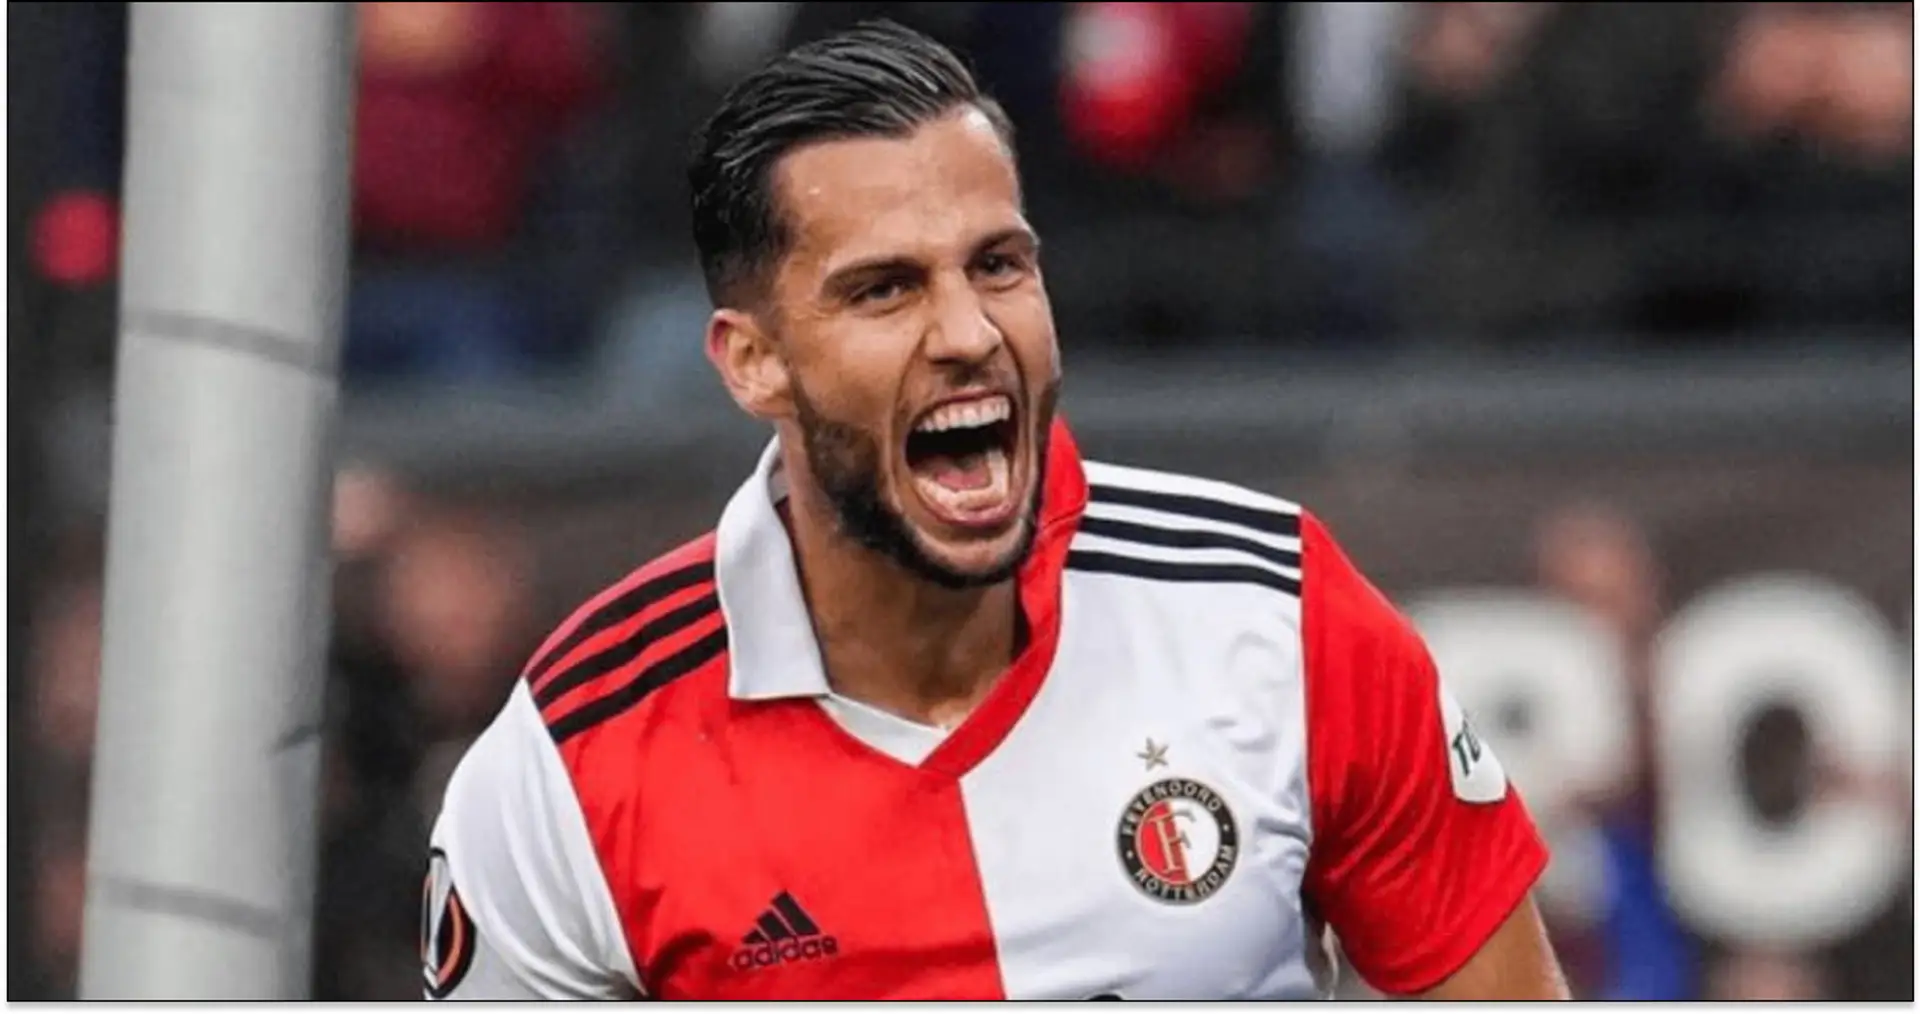 Feyenoord defender's agent confirms Liverpool interest: 'In contact'